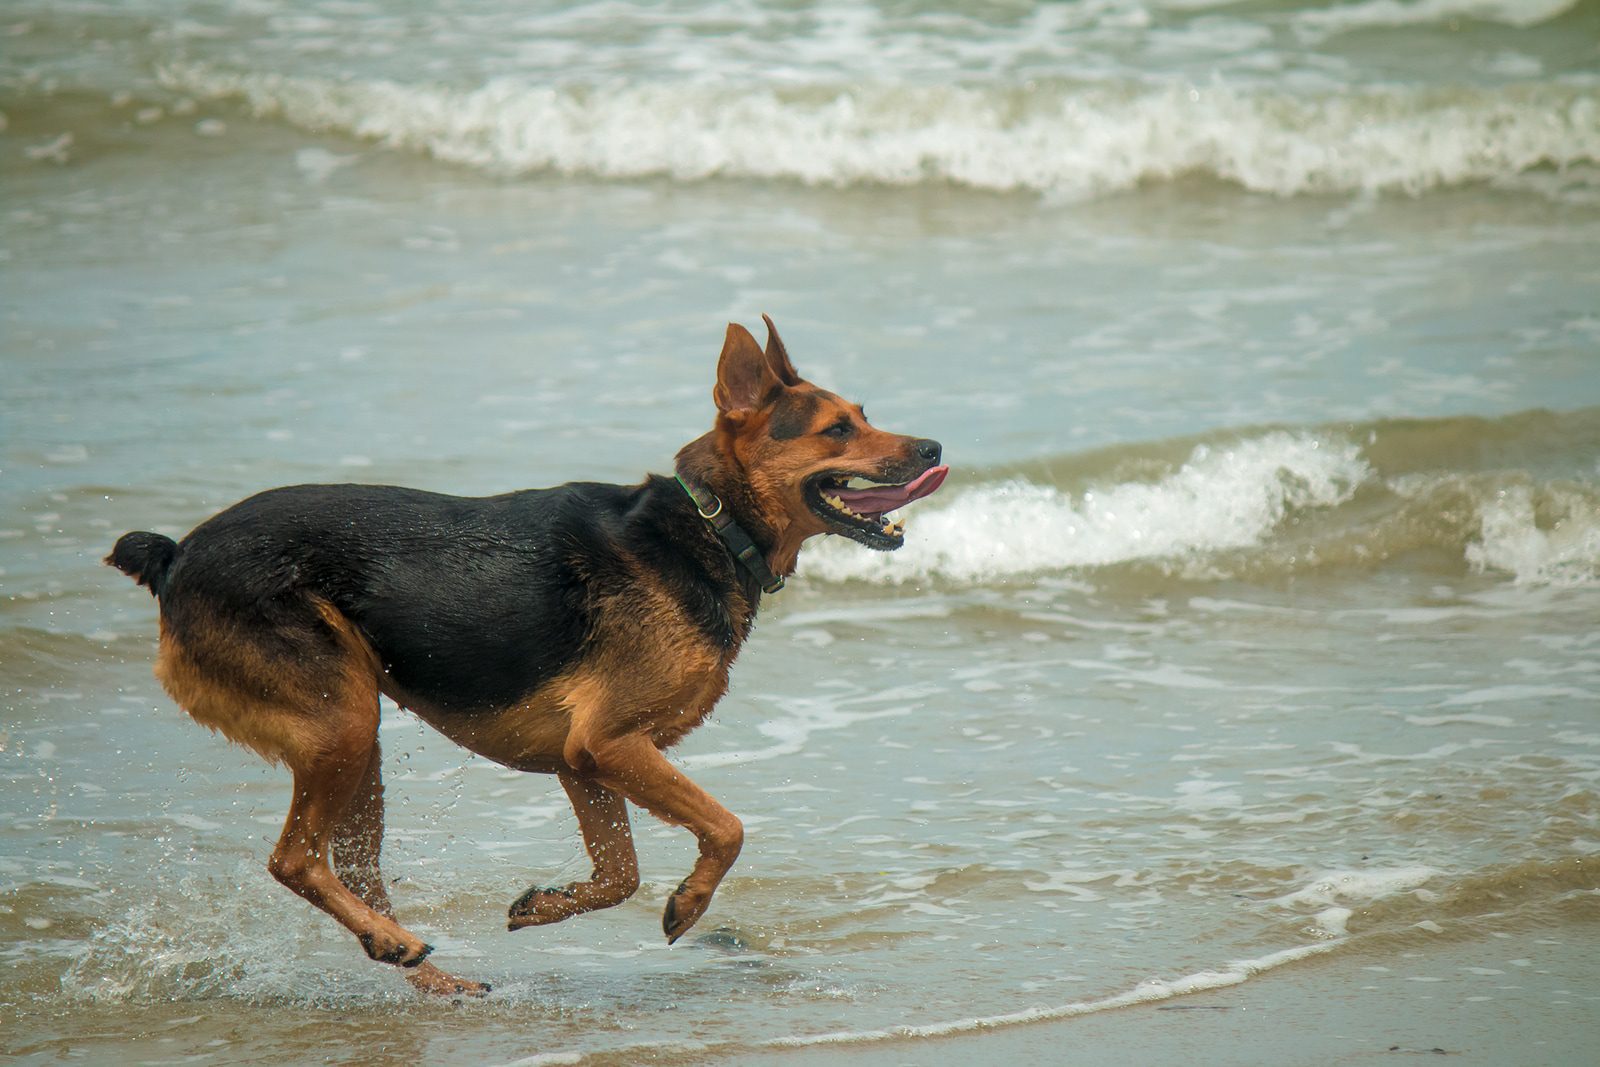 Going to the beach: how to prepare a dog